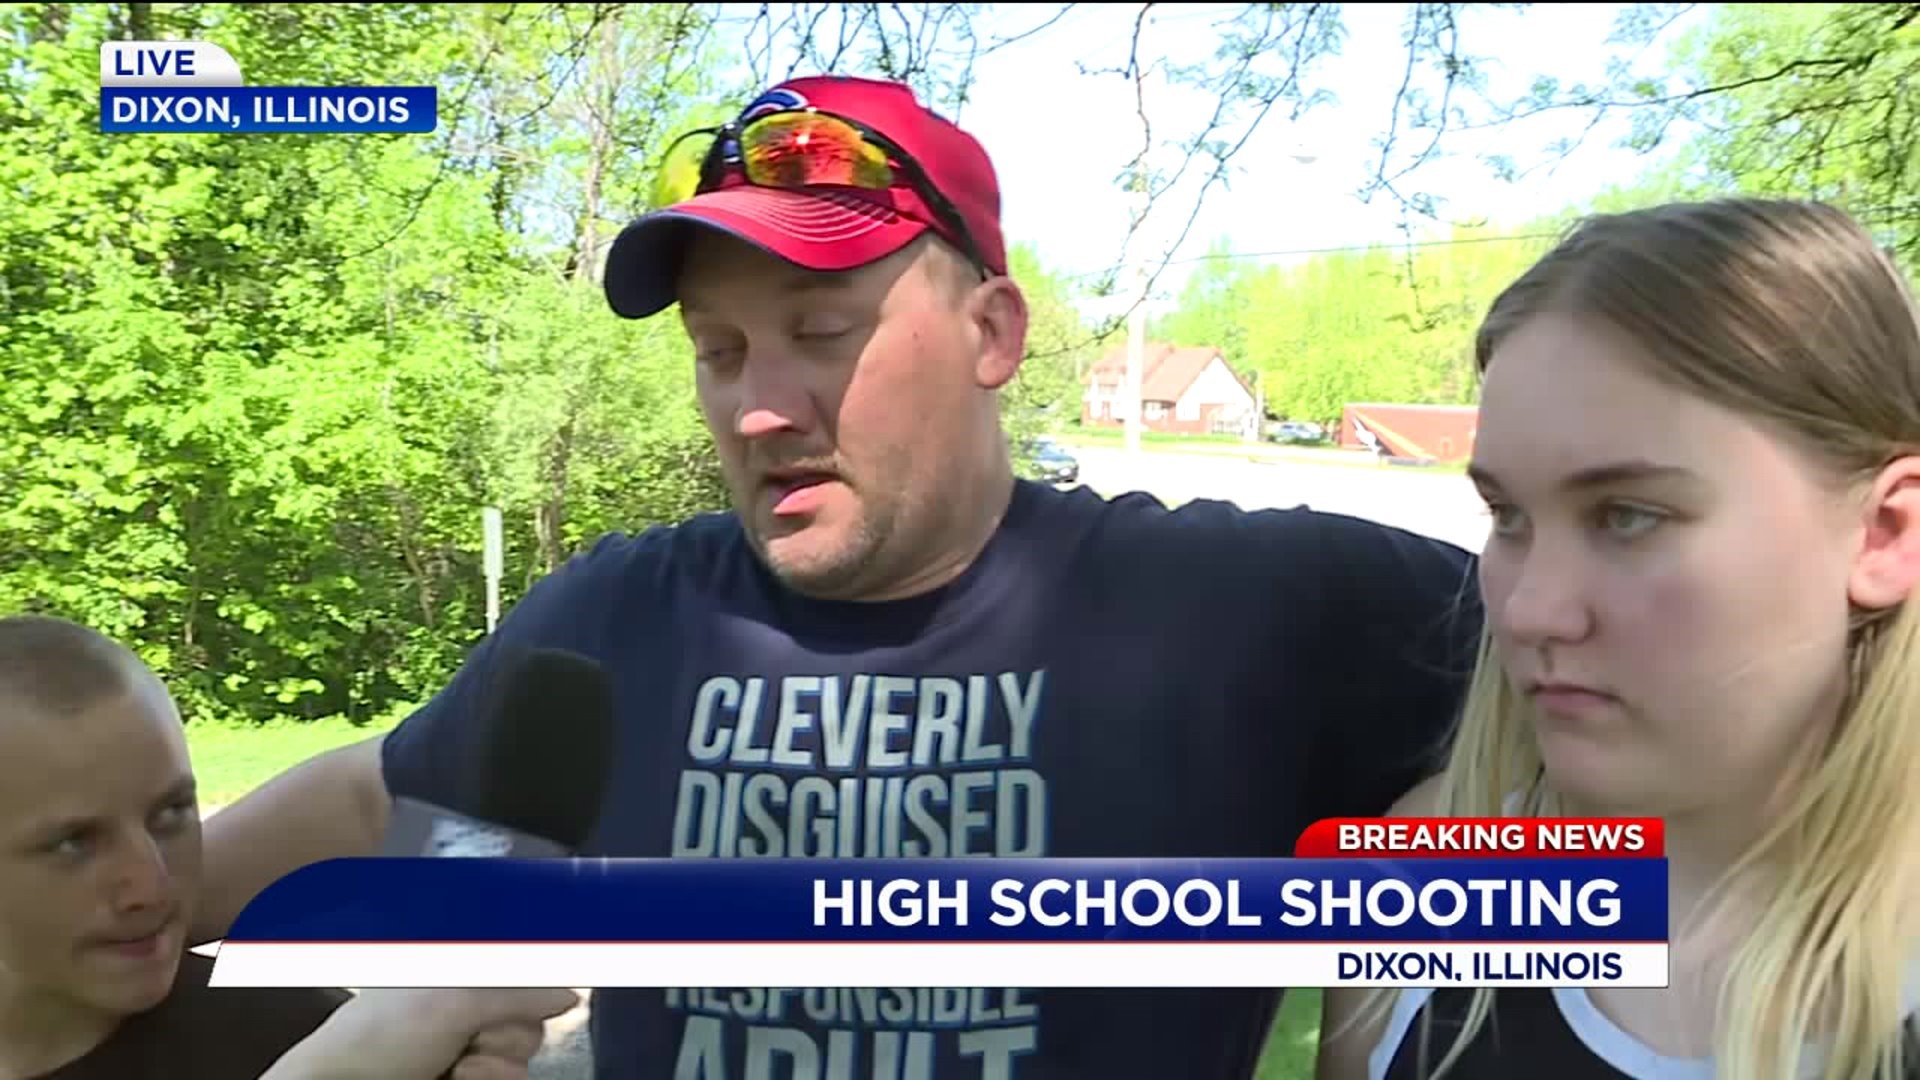 Parents and students describe the scene in Dixon